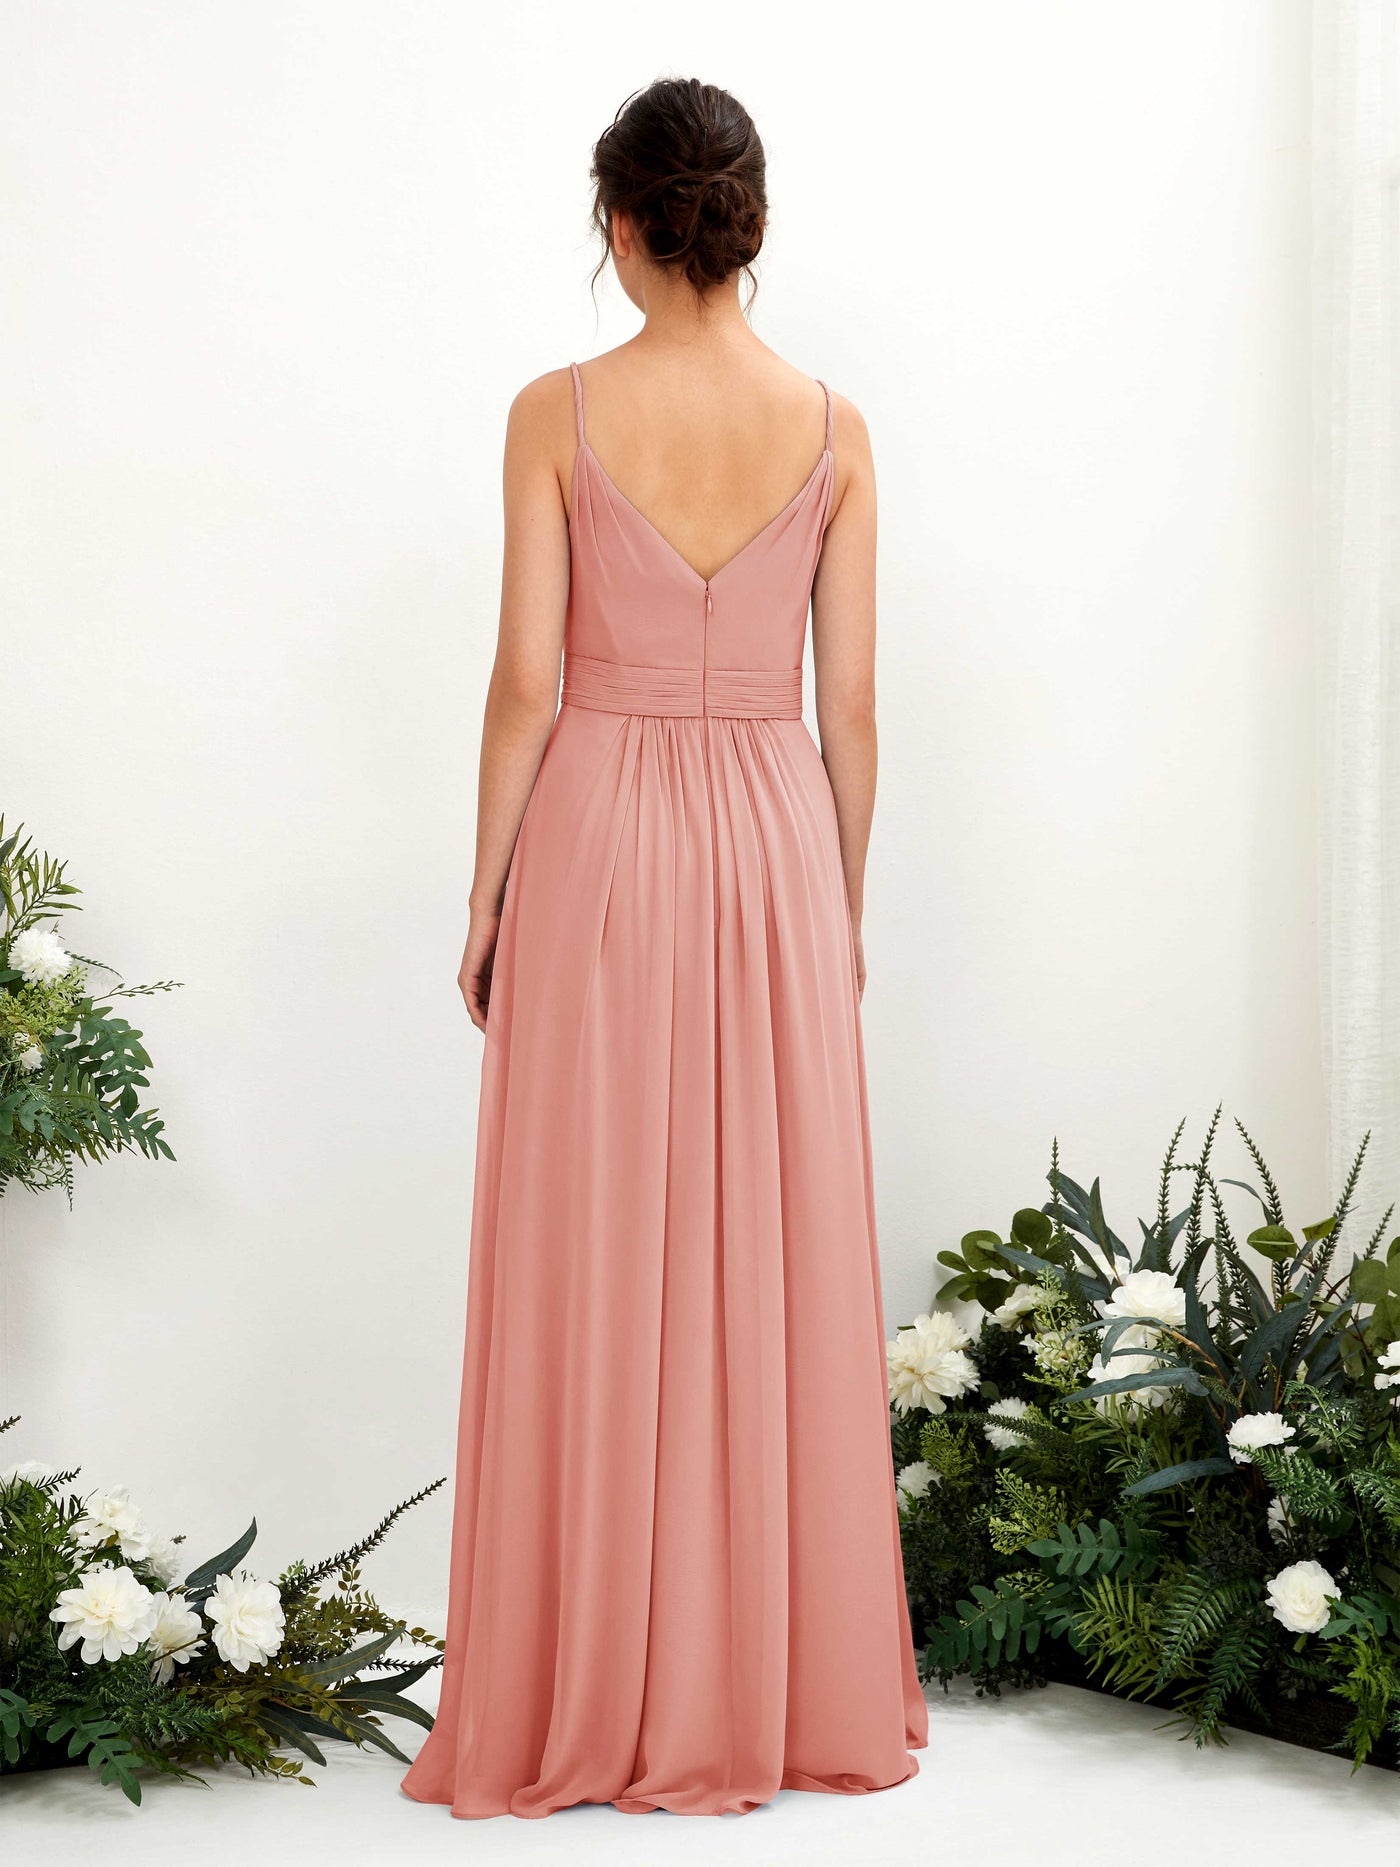 Champagne Rose Bridesmaid Dresses Bridesmaid Dress A-line Chiffon Spaghetti-straps Full Length Sleeveless Wedding Party Dress (81223906)#color_champagne-rose